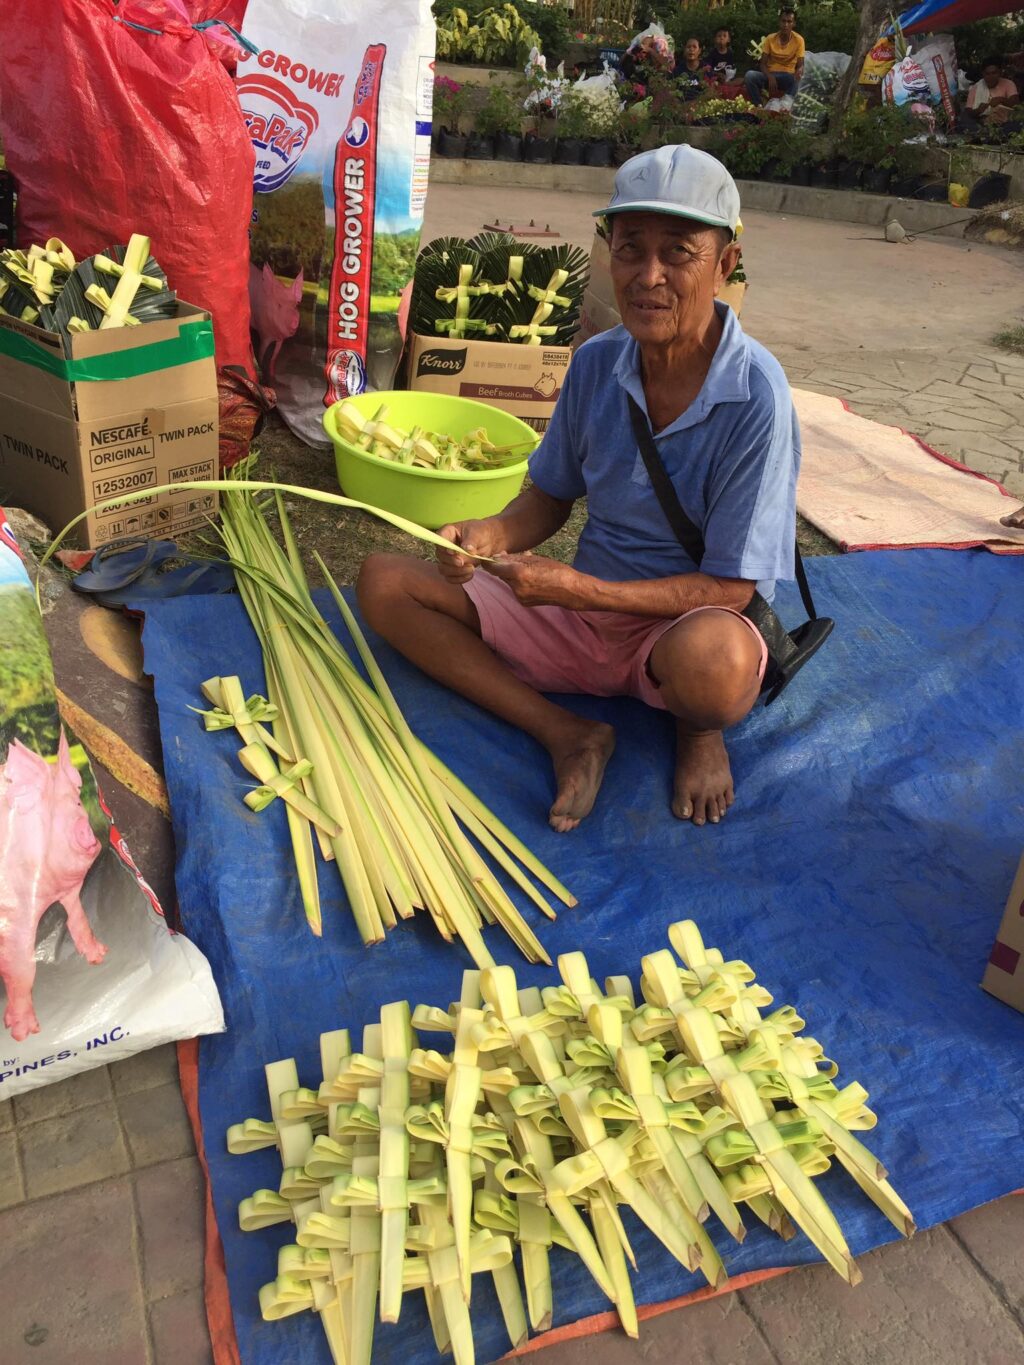 Vendors look forward to improved sales this Palm Sunday. Nasing Lobiano of Tabogon town in northern Cebu says he and his wife arrive at dawn today, April 1, in Mandaue City to prepare their palm fronds for the churchgoers tomorrow, which is Palm Sunday. | Doris Bongcac